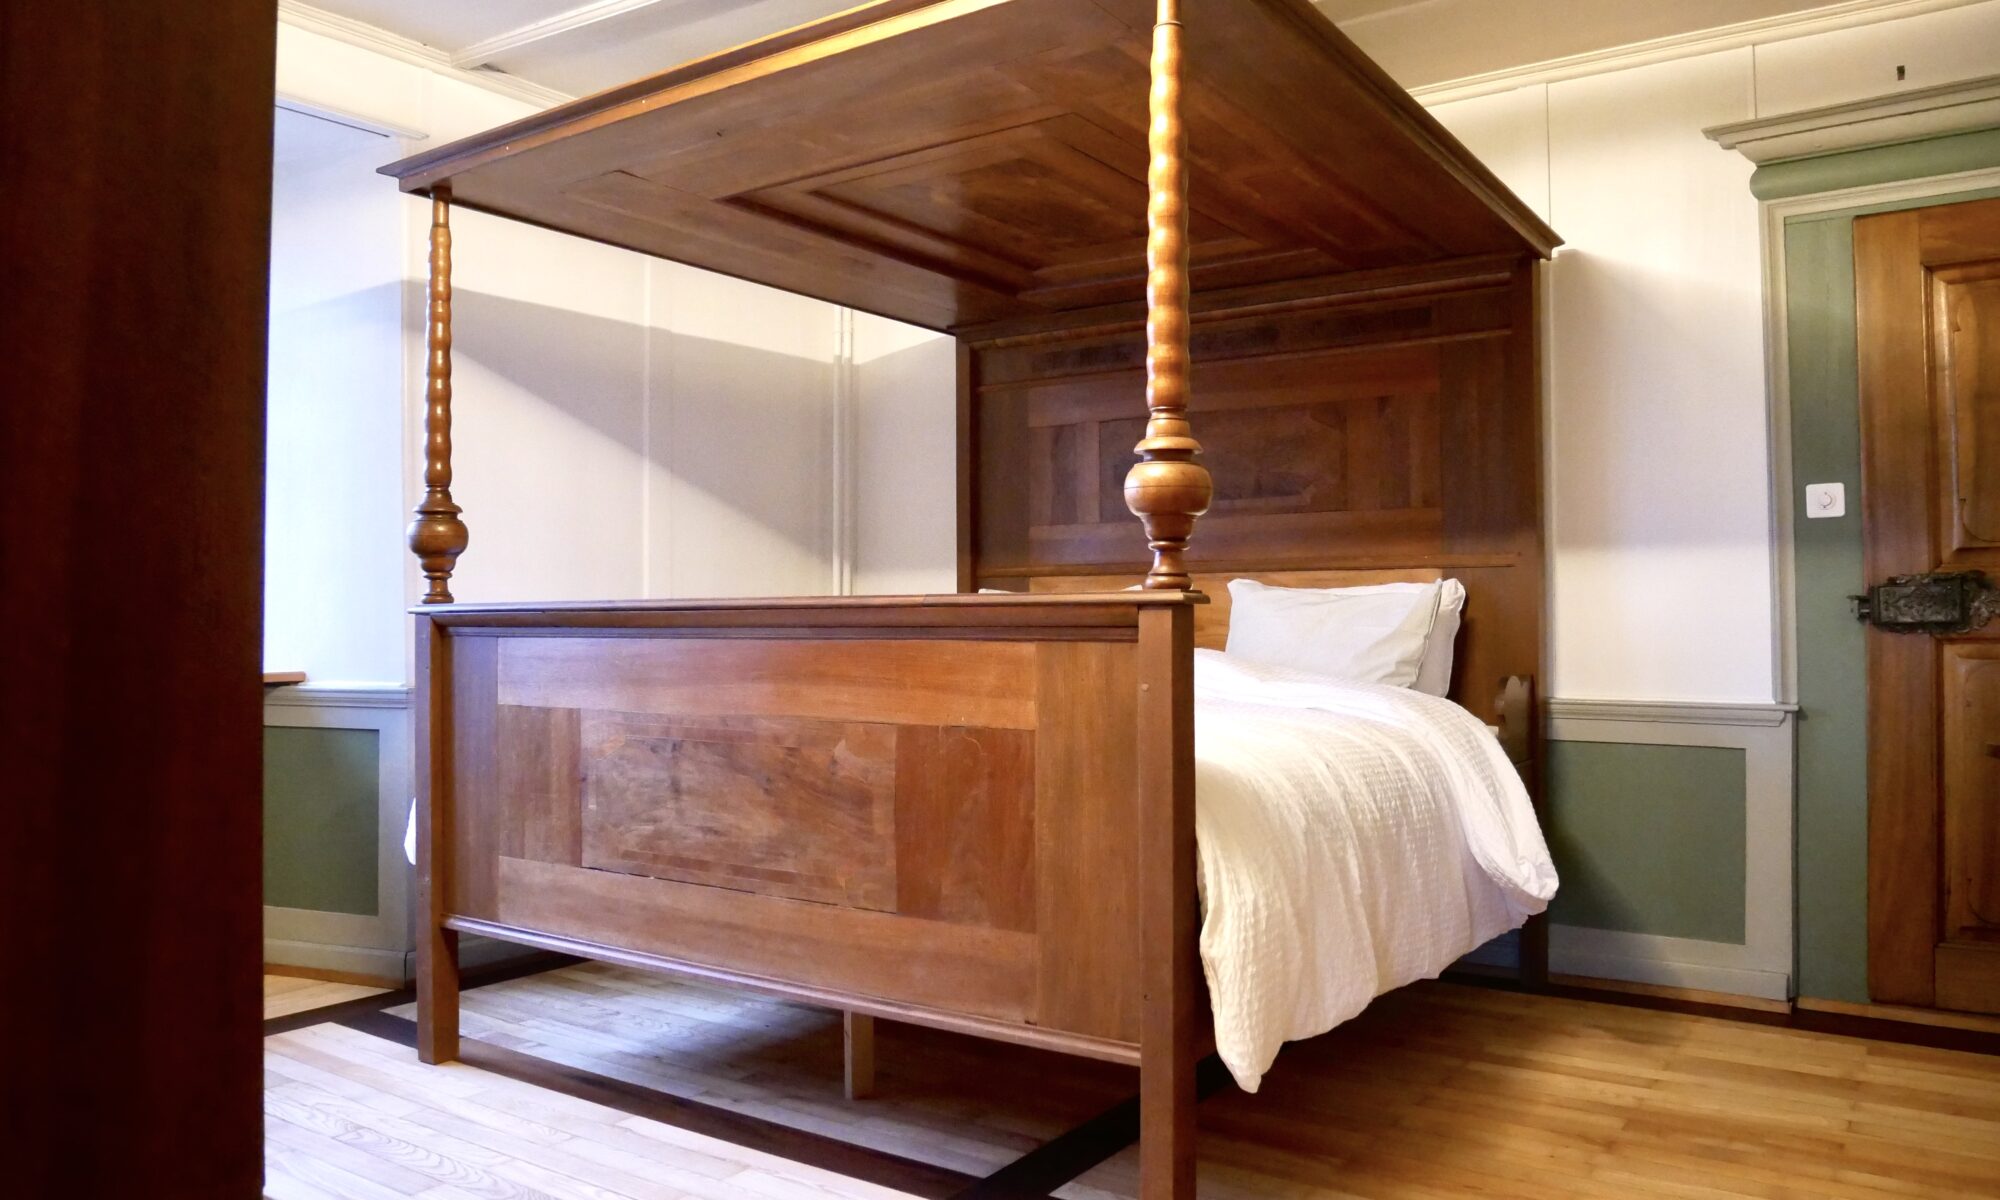 lengthened and widened four-poster bed